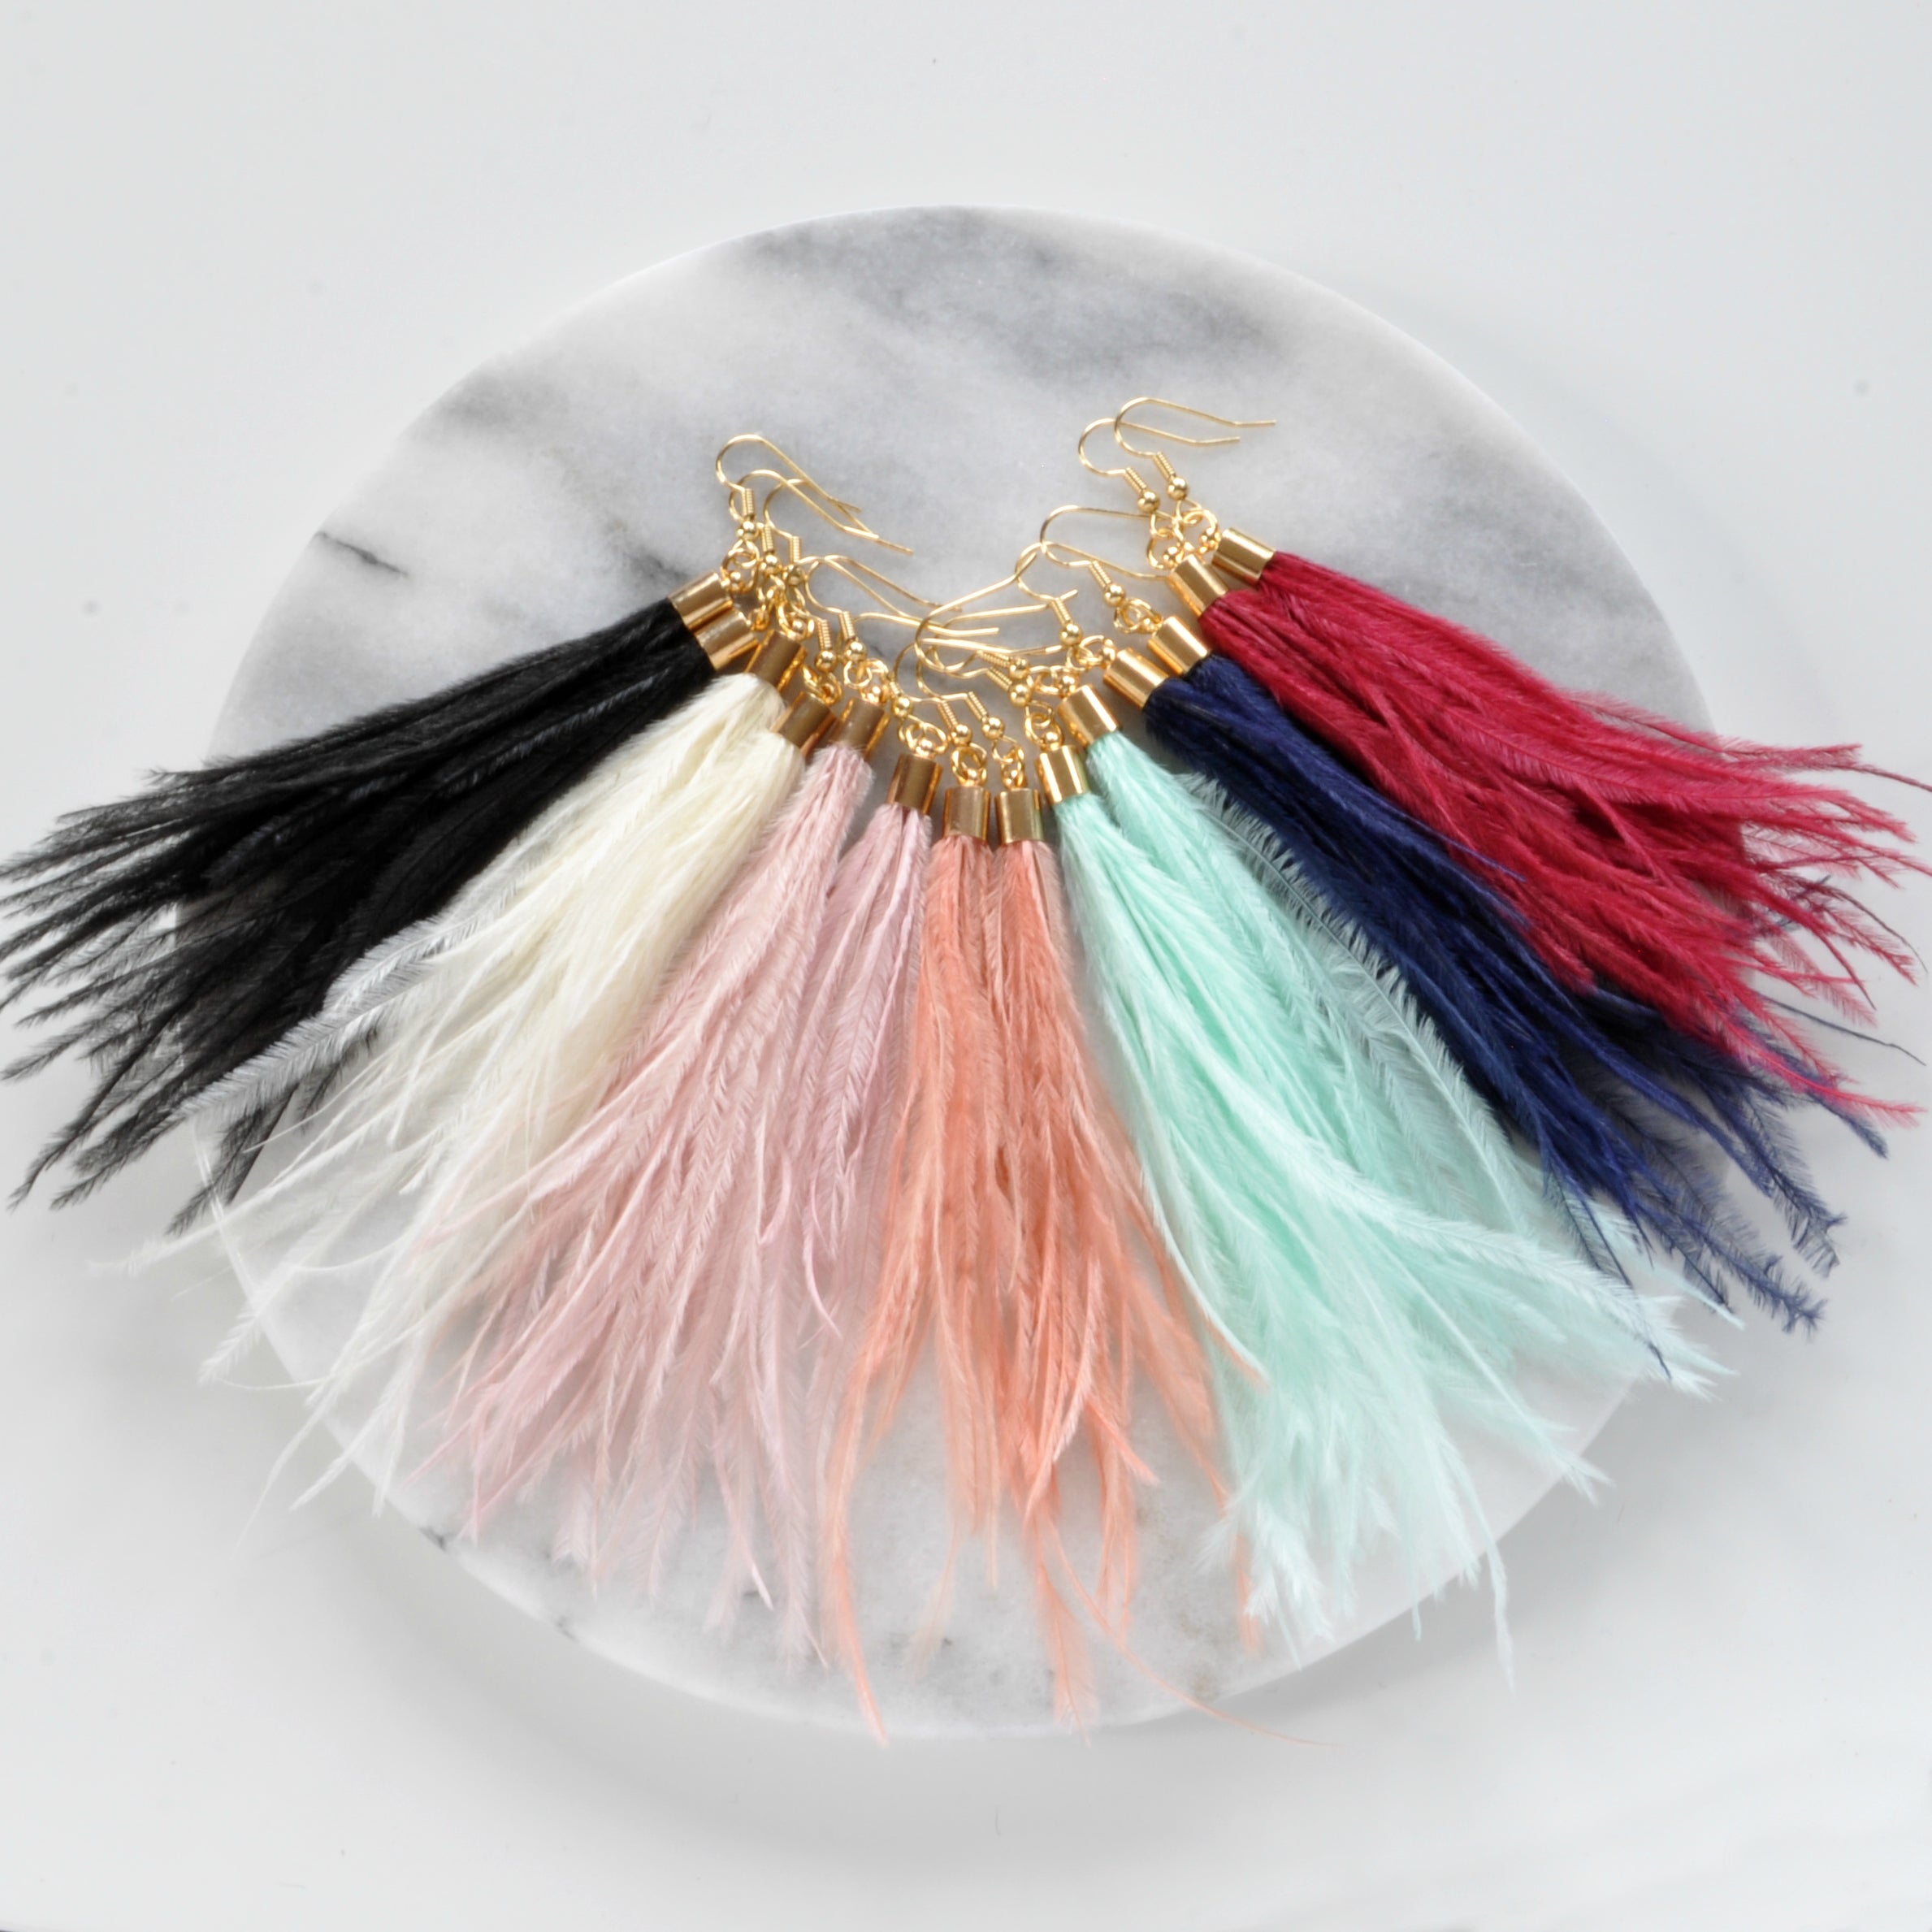 Libby & Smee dusty pale pink feather earrings with ostrich feathers and gold caps, still life with other Libby & Smee ostrich feather earrings